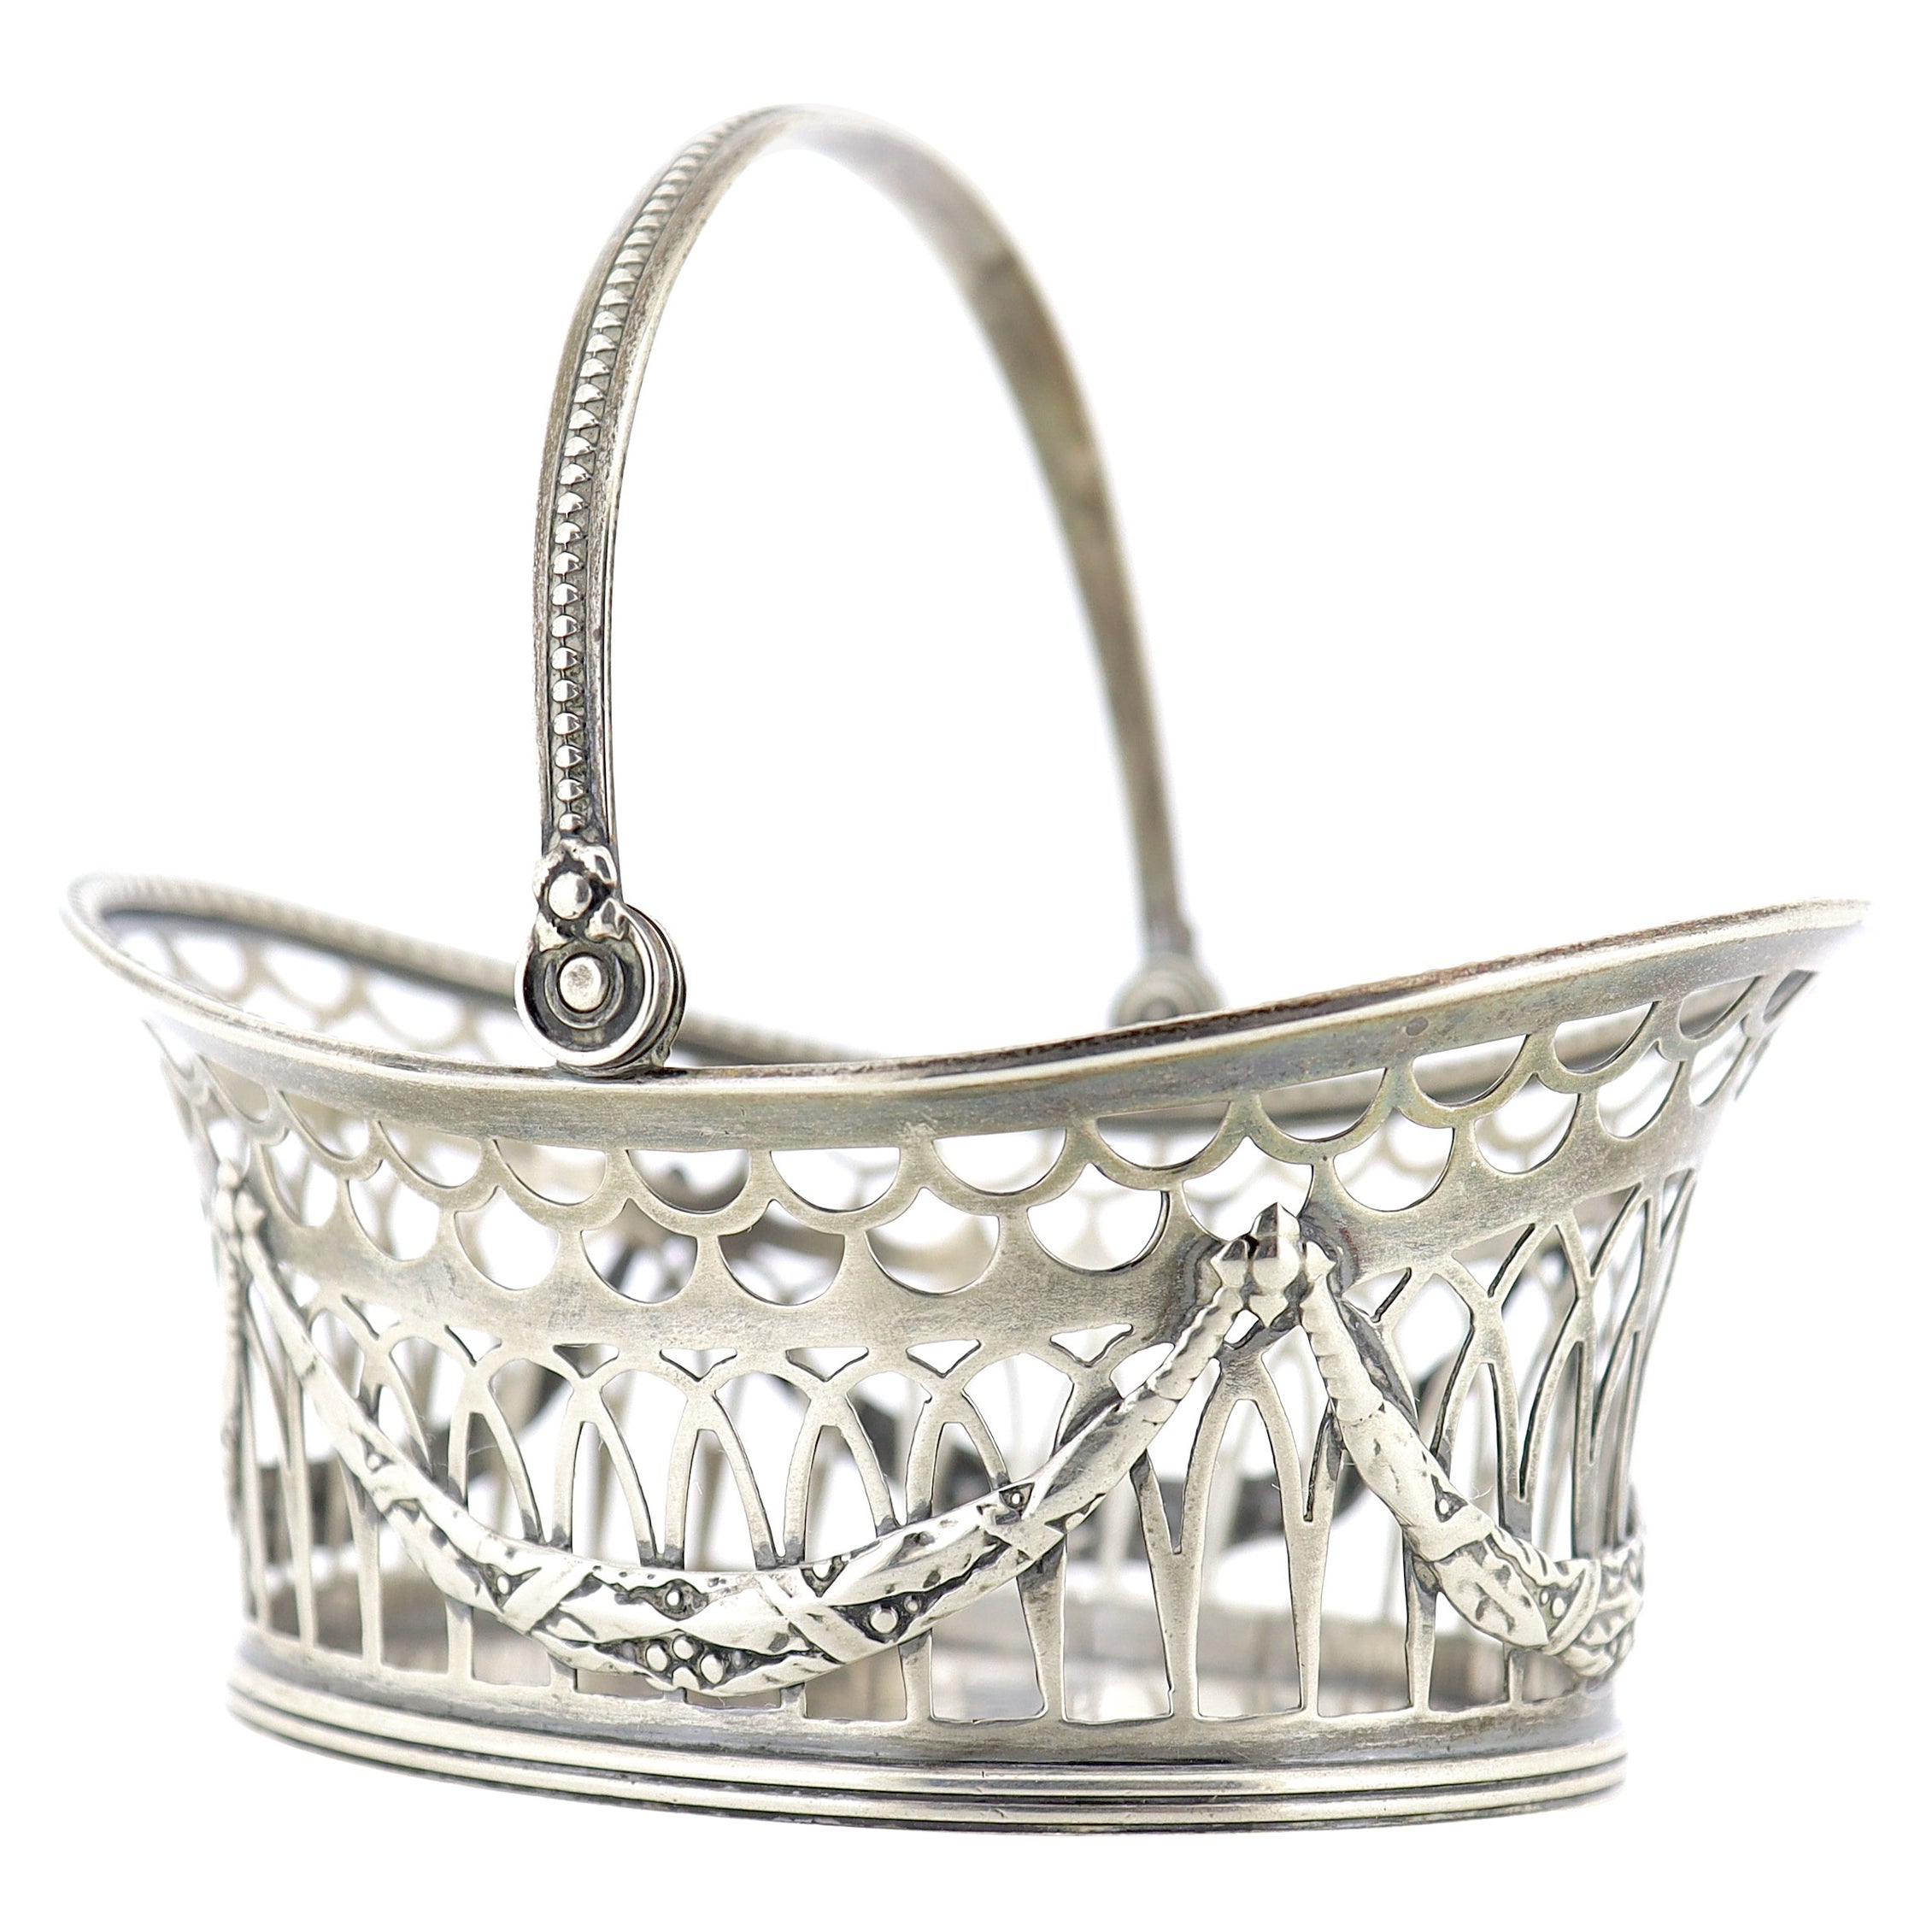 Antique Gorham Reticulated Sterling Silver Miniature Basket For Sale